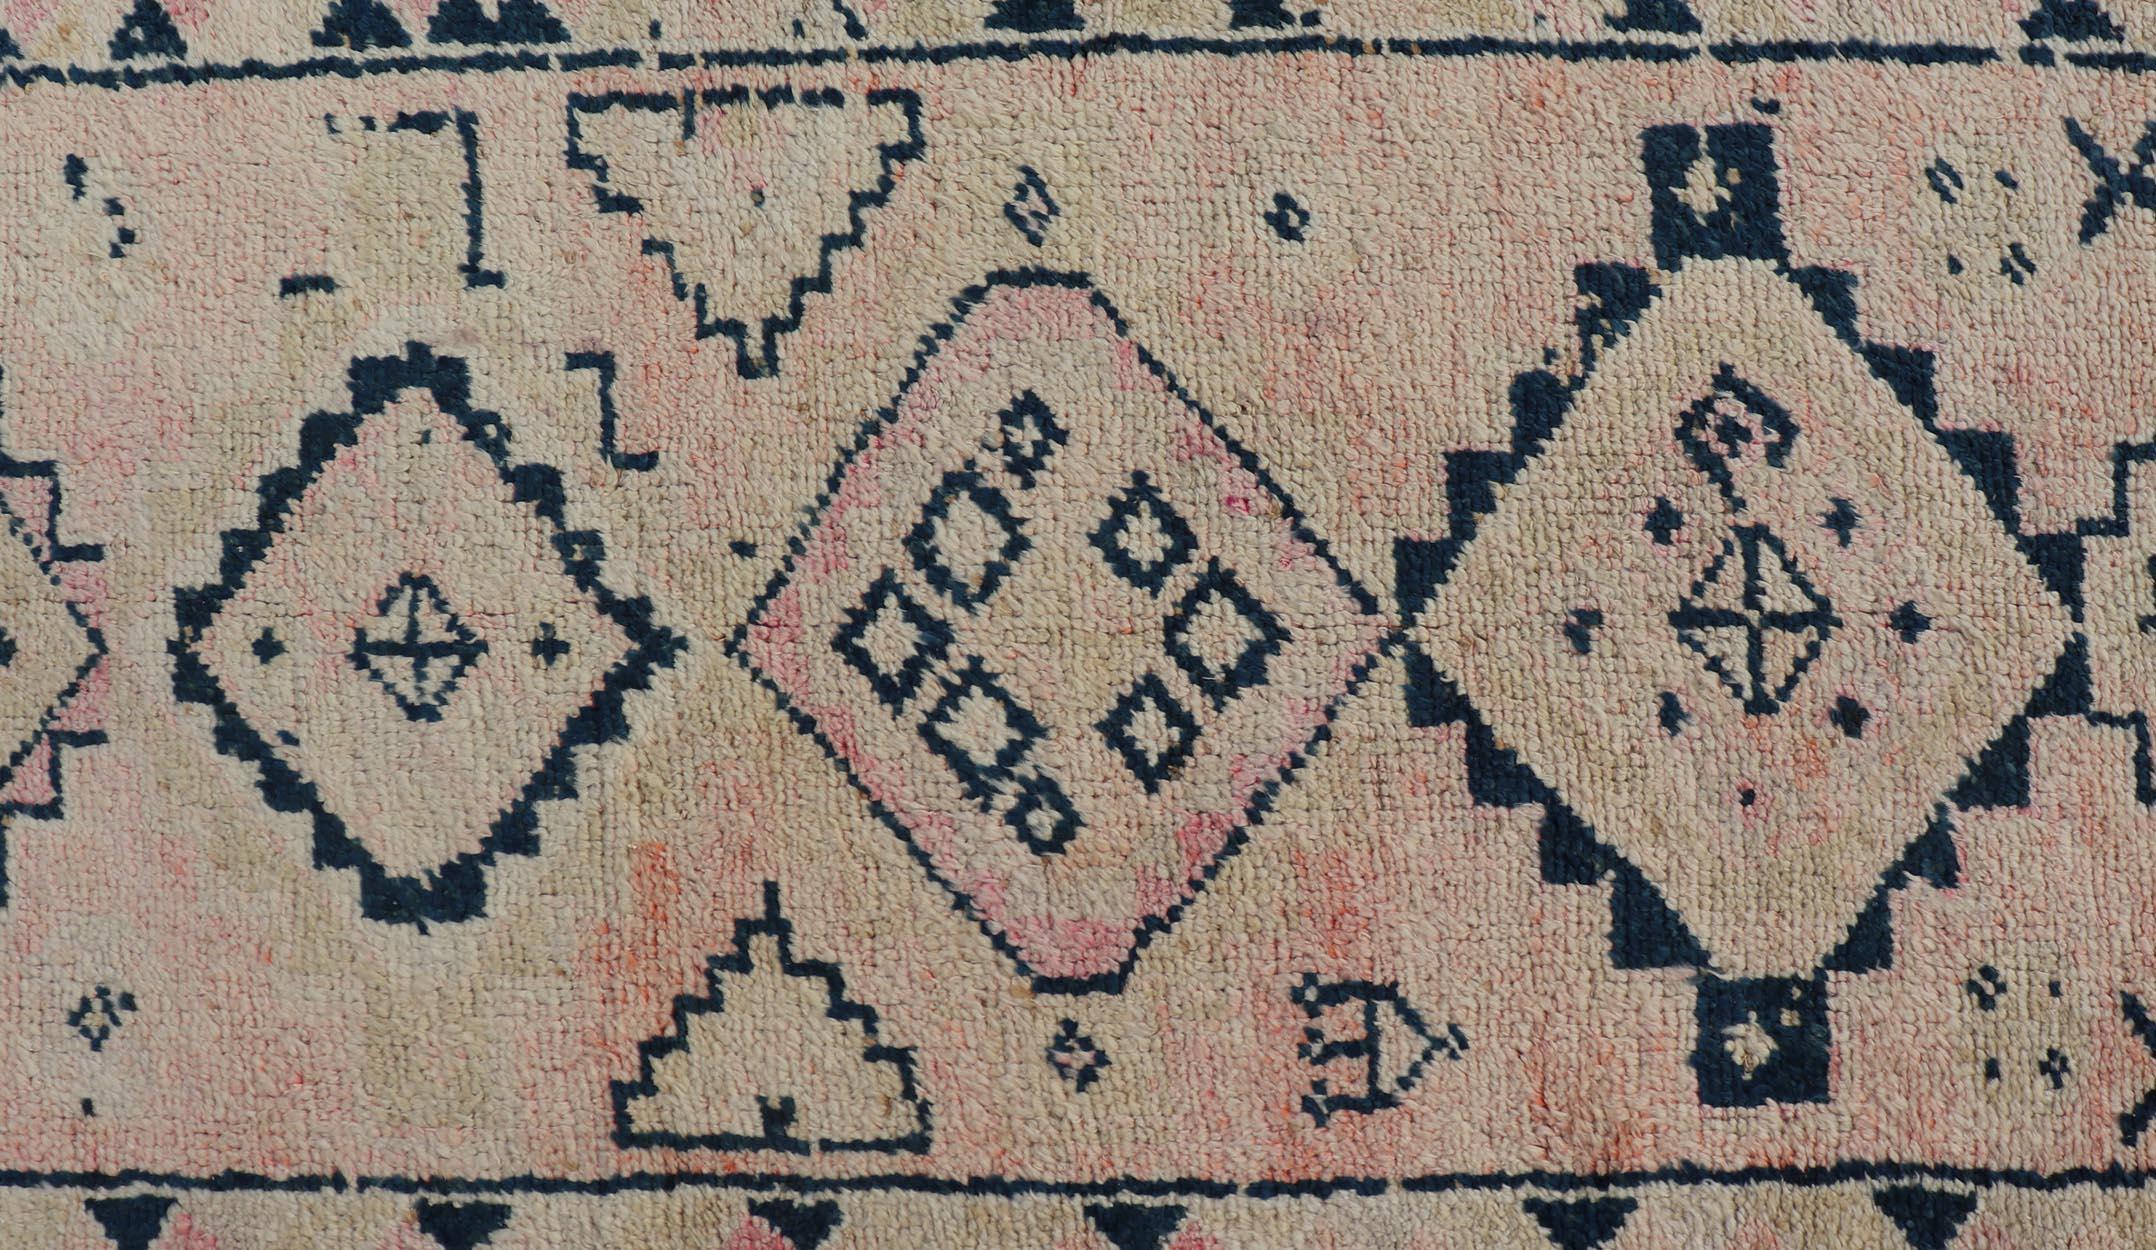 Vintage Turkish Hand Knotted Oushak runner with tribal motifs in blue and soft orange, Keivan Woven Arts / rug TU-MTU-161, country of origin / type: Turkey / Oushak, circa 1960
Measures: 2'10 x 11'8.